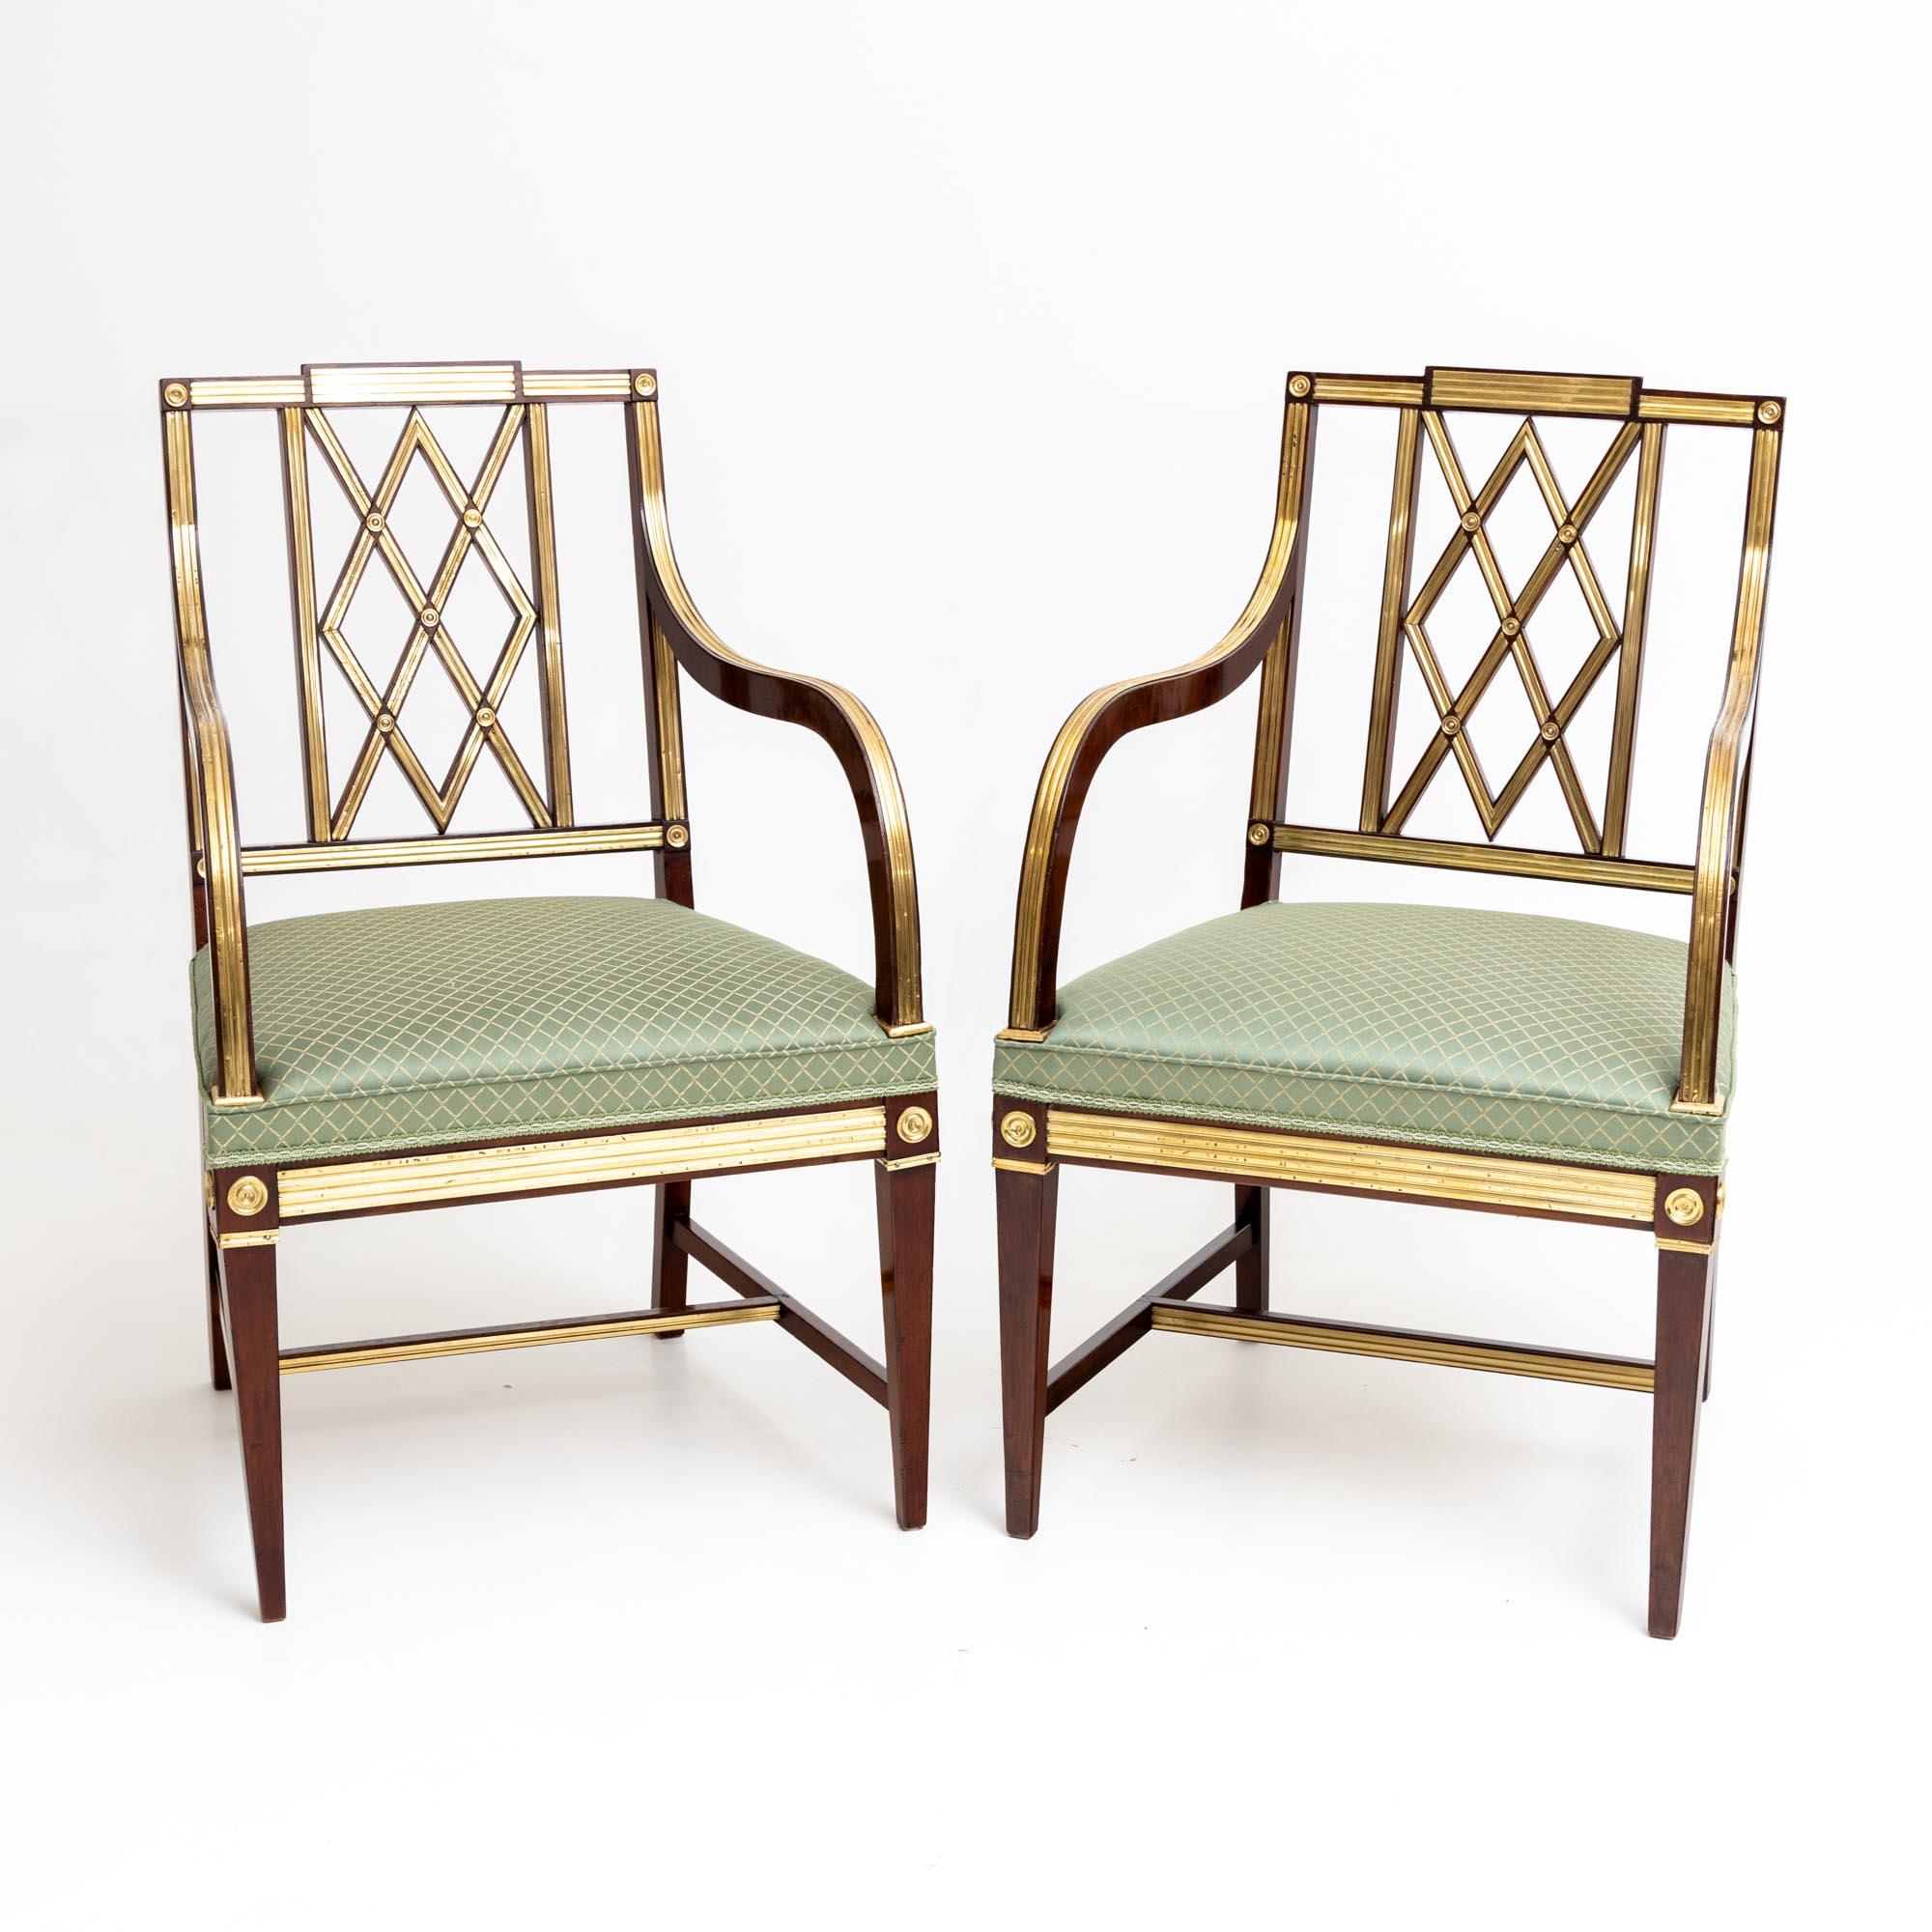 Set of three neoclassical armchairs made of mahogany with brass decoration and diamond-shaped strutting in the backrest. The chairs stand on square tapered legs with H-shaped struts. The seats are upholstered in a fine light green fabric with a gold